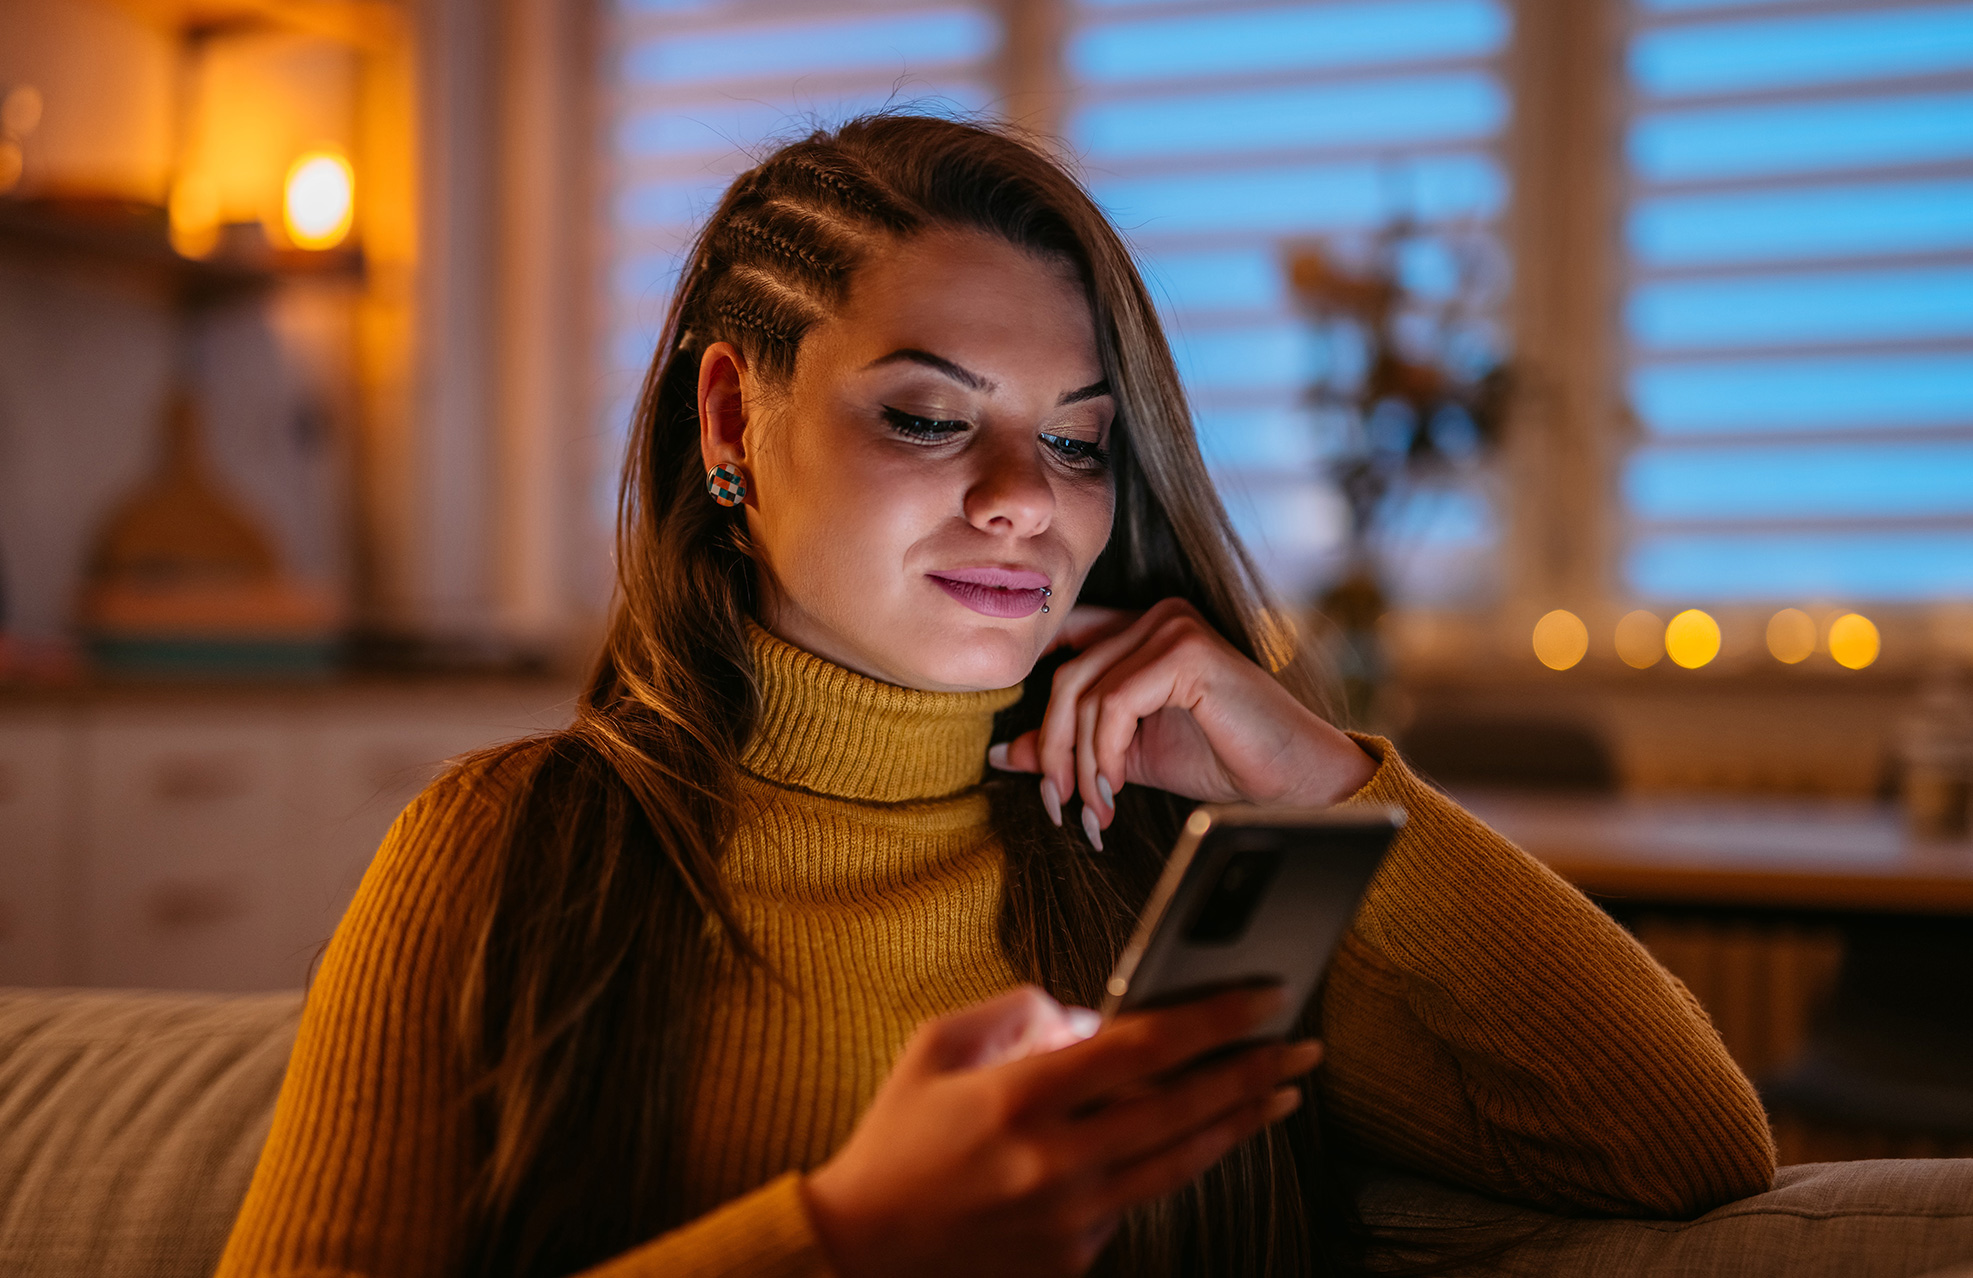 Woman looking at phone in her home